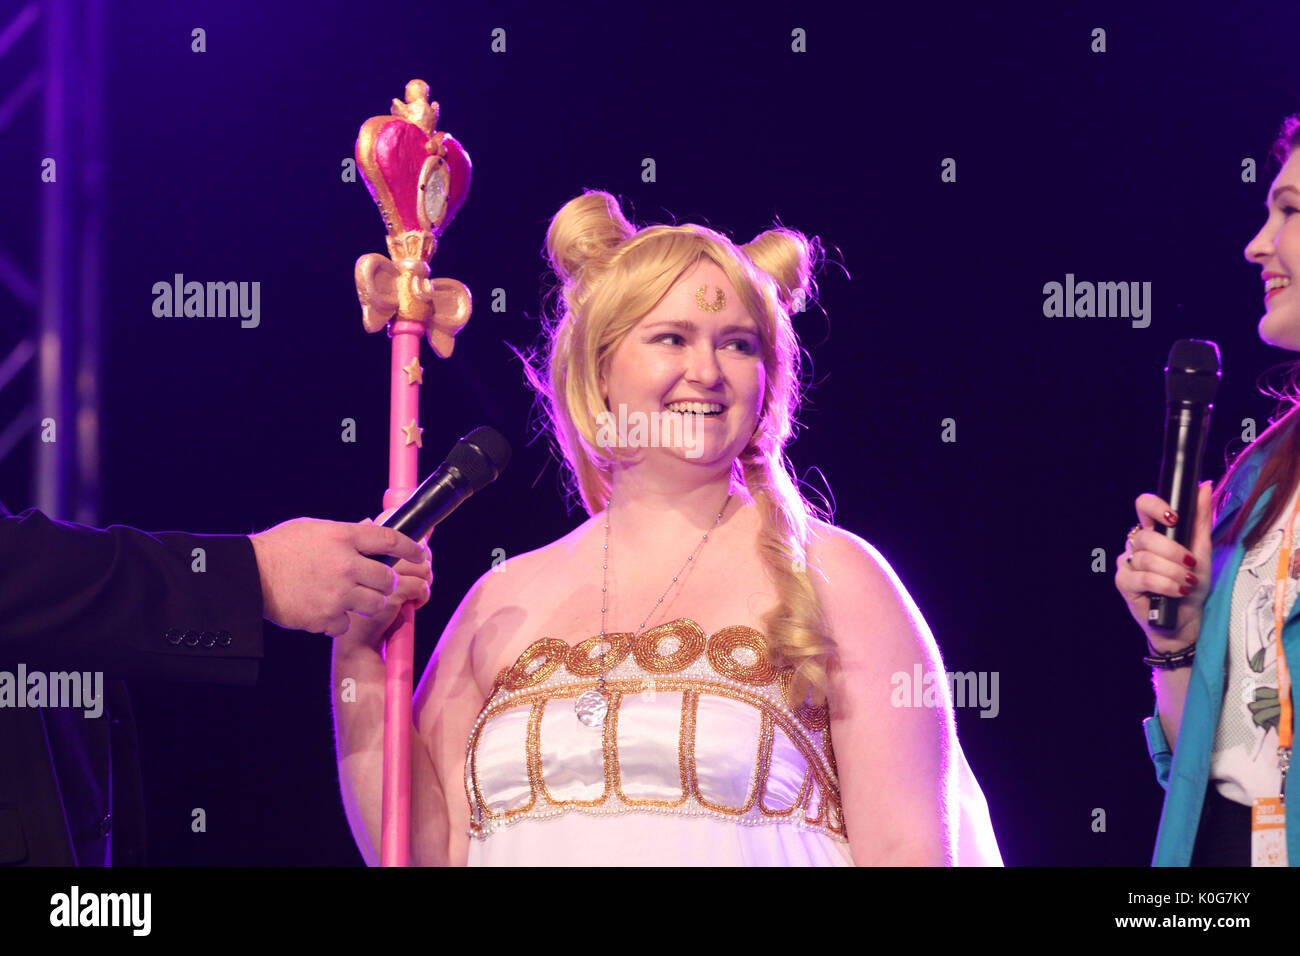 Sydney, Australia. 19 August 2017. Pictured: Cosplay competition & catwalk: Pretty Guardian Sailor Moon, Lucie as Princess Serenity. SMASH! Sydney Man Stock Photo